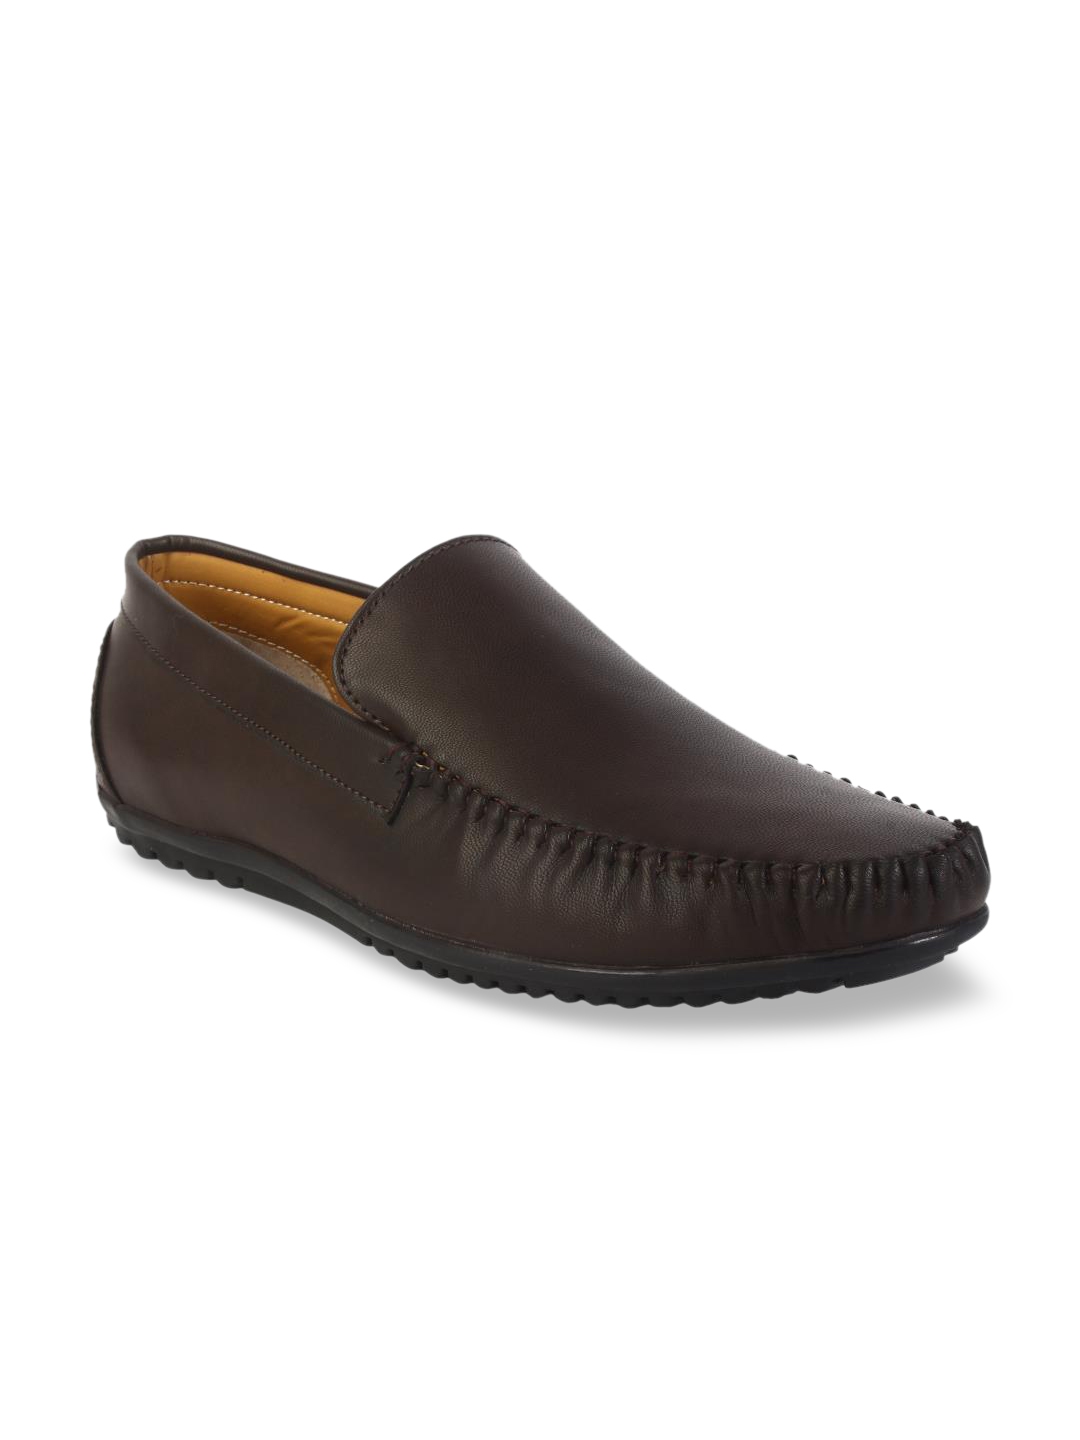 Buy Respiro Men Brown Loafers - Casual Shoes for Men 9438507 | Myntra